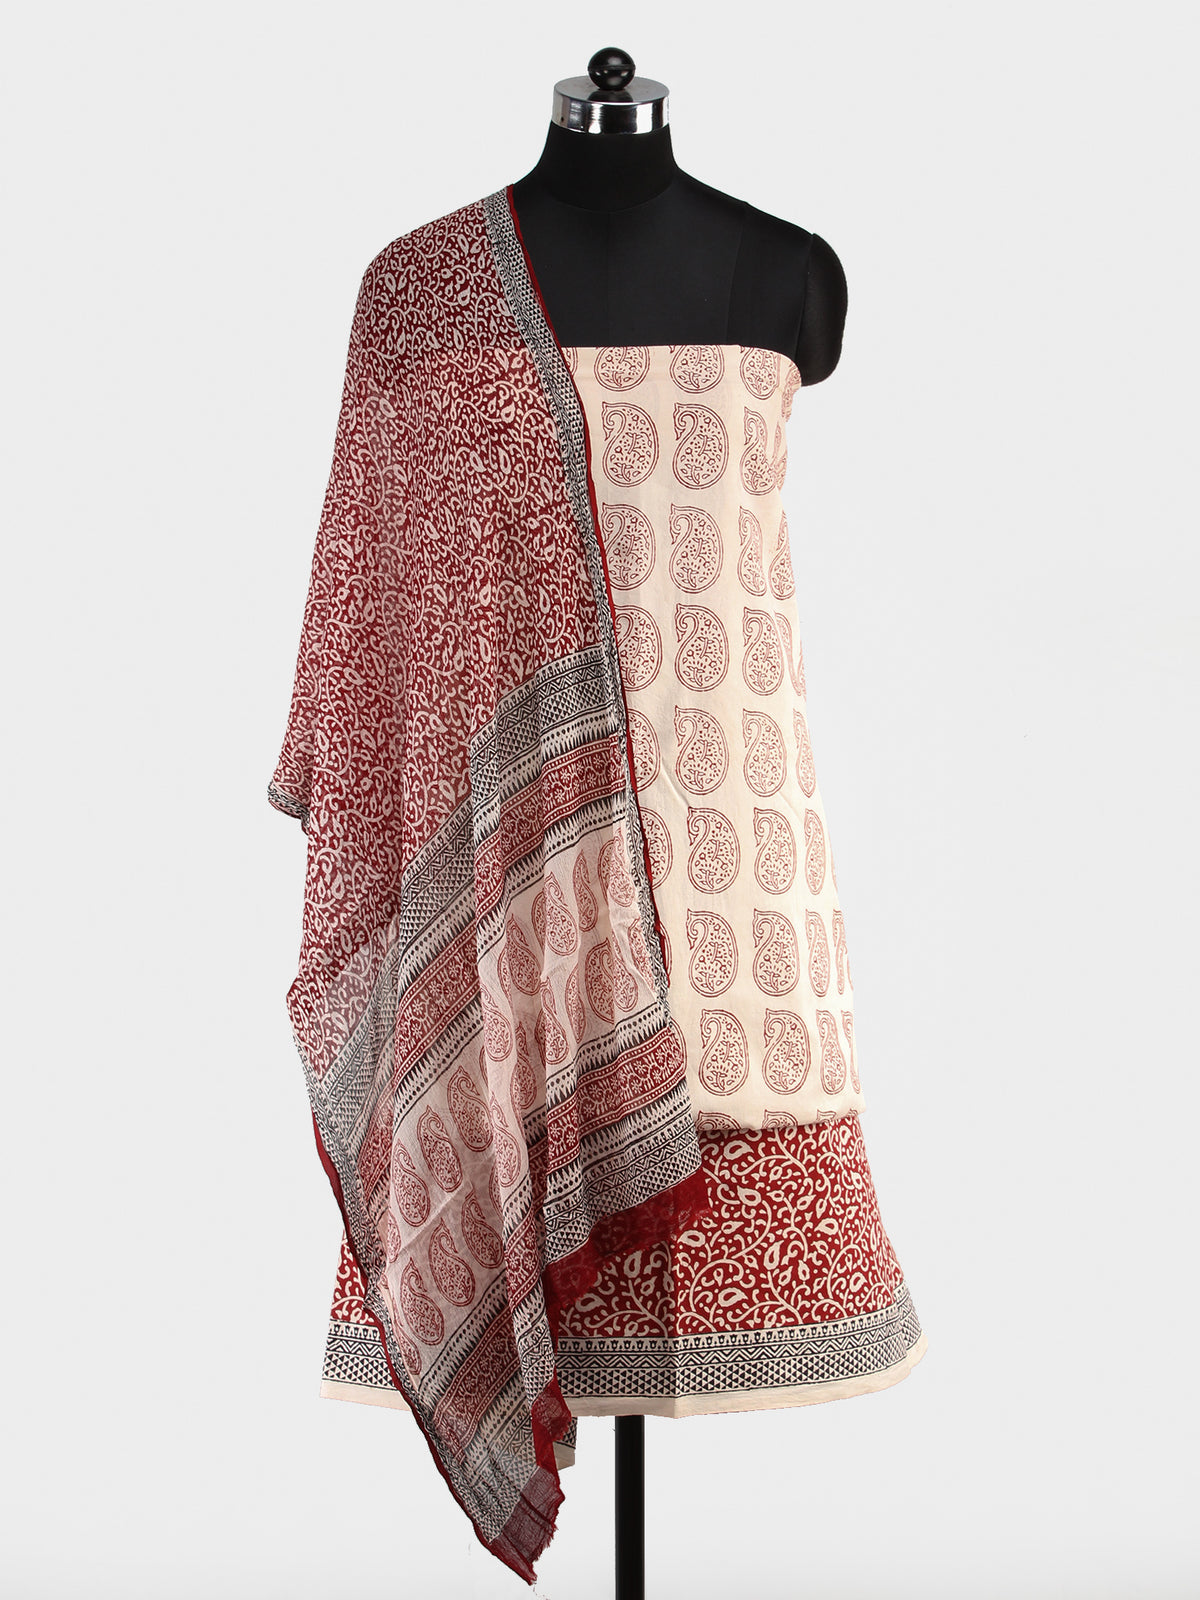 Off White Red Bagh Hand Block Printed Cotton Suit-Salwar Fabric With Chiffon Dupatta (Set of 3) - SU01HB408